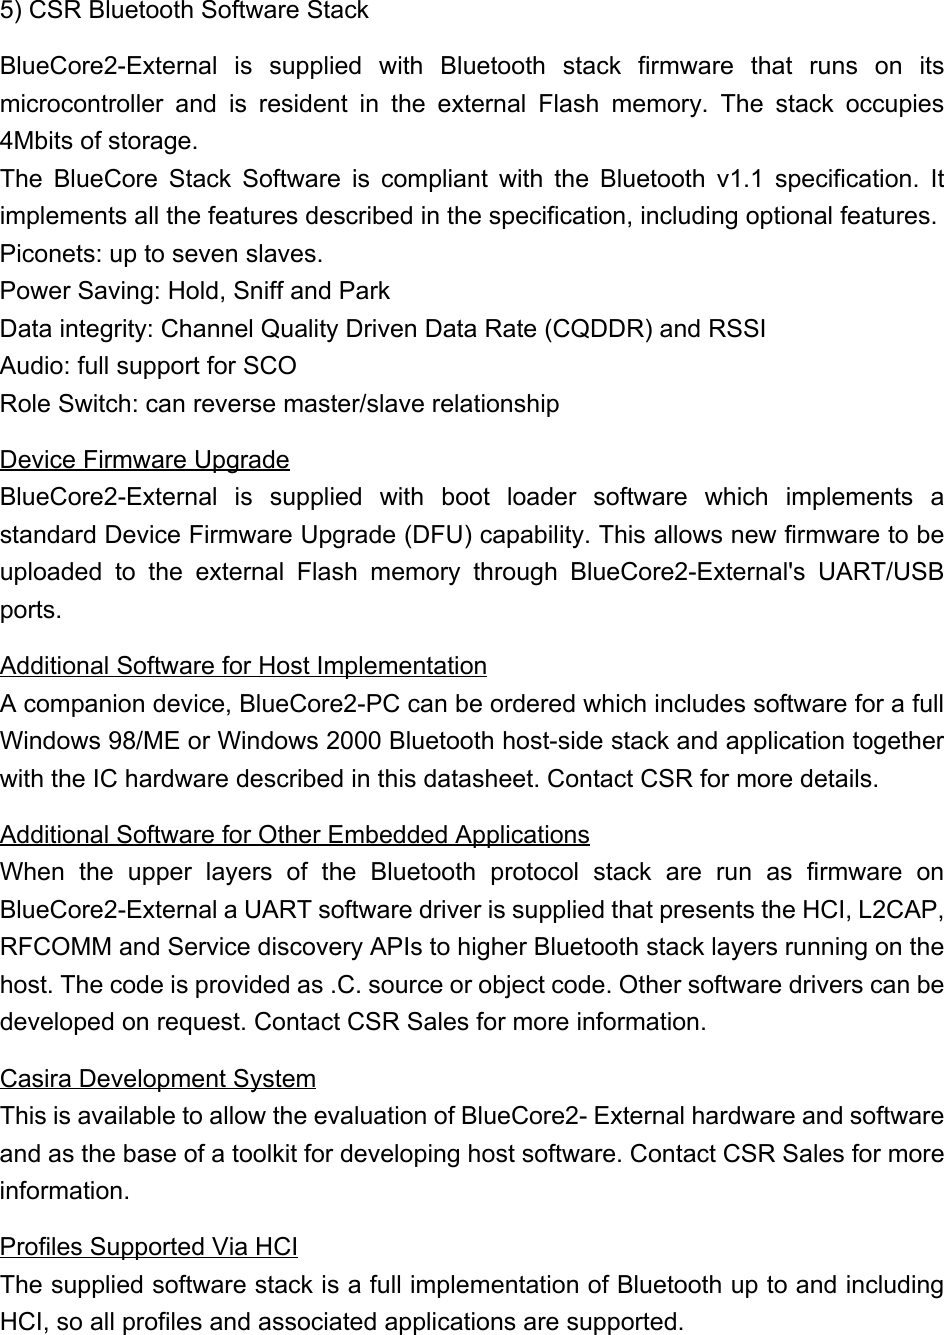 5) CSR Bluetooth Software StackBlueCore2-External is supplied with Bluetooth stack firmware that runs on itsmicrocontroller and is resident in the external Flash memory. The stack occupies4Mbits of storage.The BlueCore Stack Software is compliant with the Bluetooth v1.1 specification. Itimplements all the features described in the specification, including optional features.Piconets: up to seven slaves.    Power Saving: Hold, Sniff and ParkData integrity: Channel Quality Driven Data Rate (CQDDR) and RSSIAudio: full support for SCORole Switch: can reverse master/slave relationshipDevice Firmware UpgradeBlueCore2-External is supplied with boot loader software which implements astandard Device Firmware Upgrade (DFU) capability. This allows new firmware to beuploaded to the external Flash memory through BlueCore2-External&apos;s UART/USBports.Additional Software for Host ImplementationA companion device, BlueCore2-PC can be ordered which includes software for a fullWindows 98/ME or Windows 2000 Bluetooth host-side stack and application togetherwith the IC hardware described in this datasheet. Contact CSR for more details.Additional Software for Other Embedded ApplicationsWhen the upper layers of the Bluetooth protocol stack are run as firmware onBlueCore2-External a UART software driver is supplied that presents the HCI, L2CAP,RFCOMM and Service discovery APIs to higher Bluetooth stack layers running on thehost. The code is provided as .C. source or object code. Other software drivers can bedeveloped on request. Contact CSR Sales for more information.Casira Development SystemThis is available to allow the evaluation of BlueCore2- External hardware and softwareand as the base of a toolkit for developing host software. Contact CSR Sales for moreinformation.Profiles Supported Via HCIThe supplied software stack is a full implementation of Bluetooth up to and includingHCI, so all profiles and associated applications are supported.